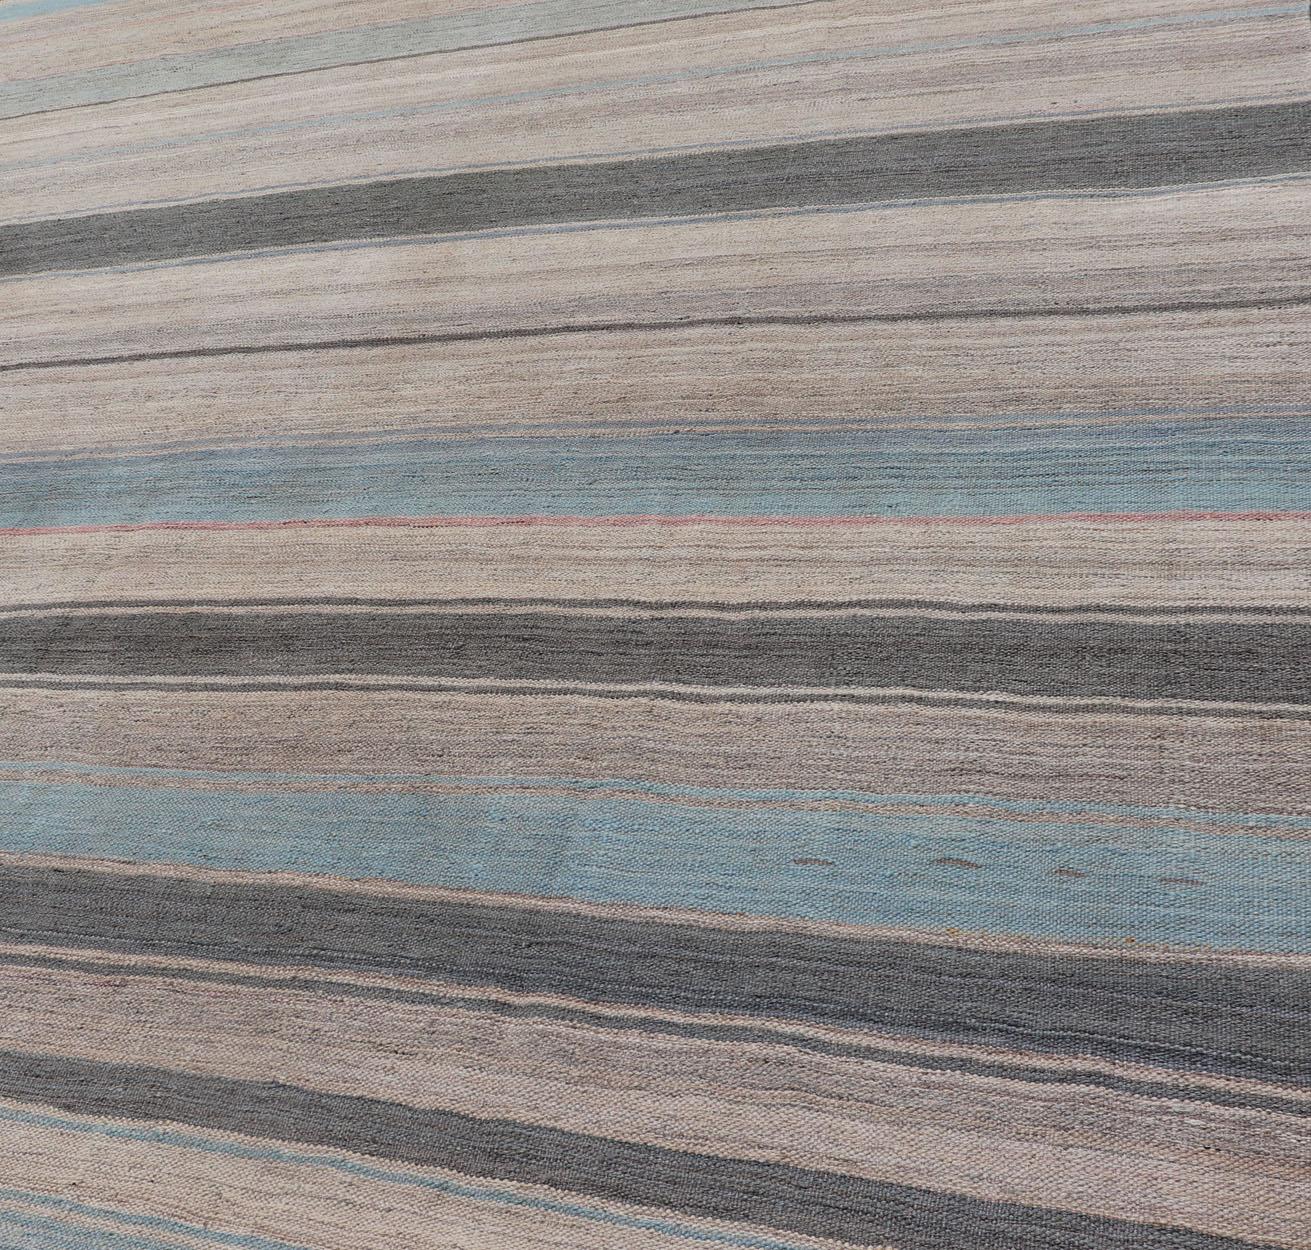 Modern Kilim Rug with Large Stripes in Shades of Blue, Taupe, Gray In Excellent Condition For Sale In Atlanta, GA